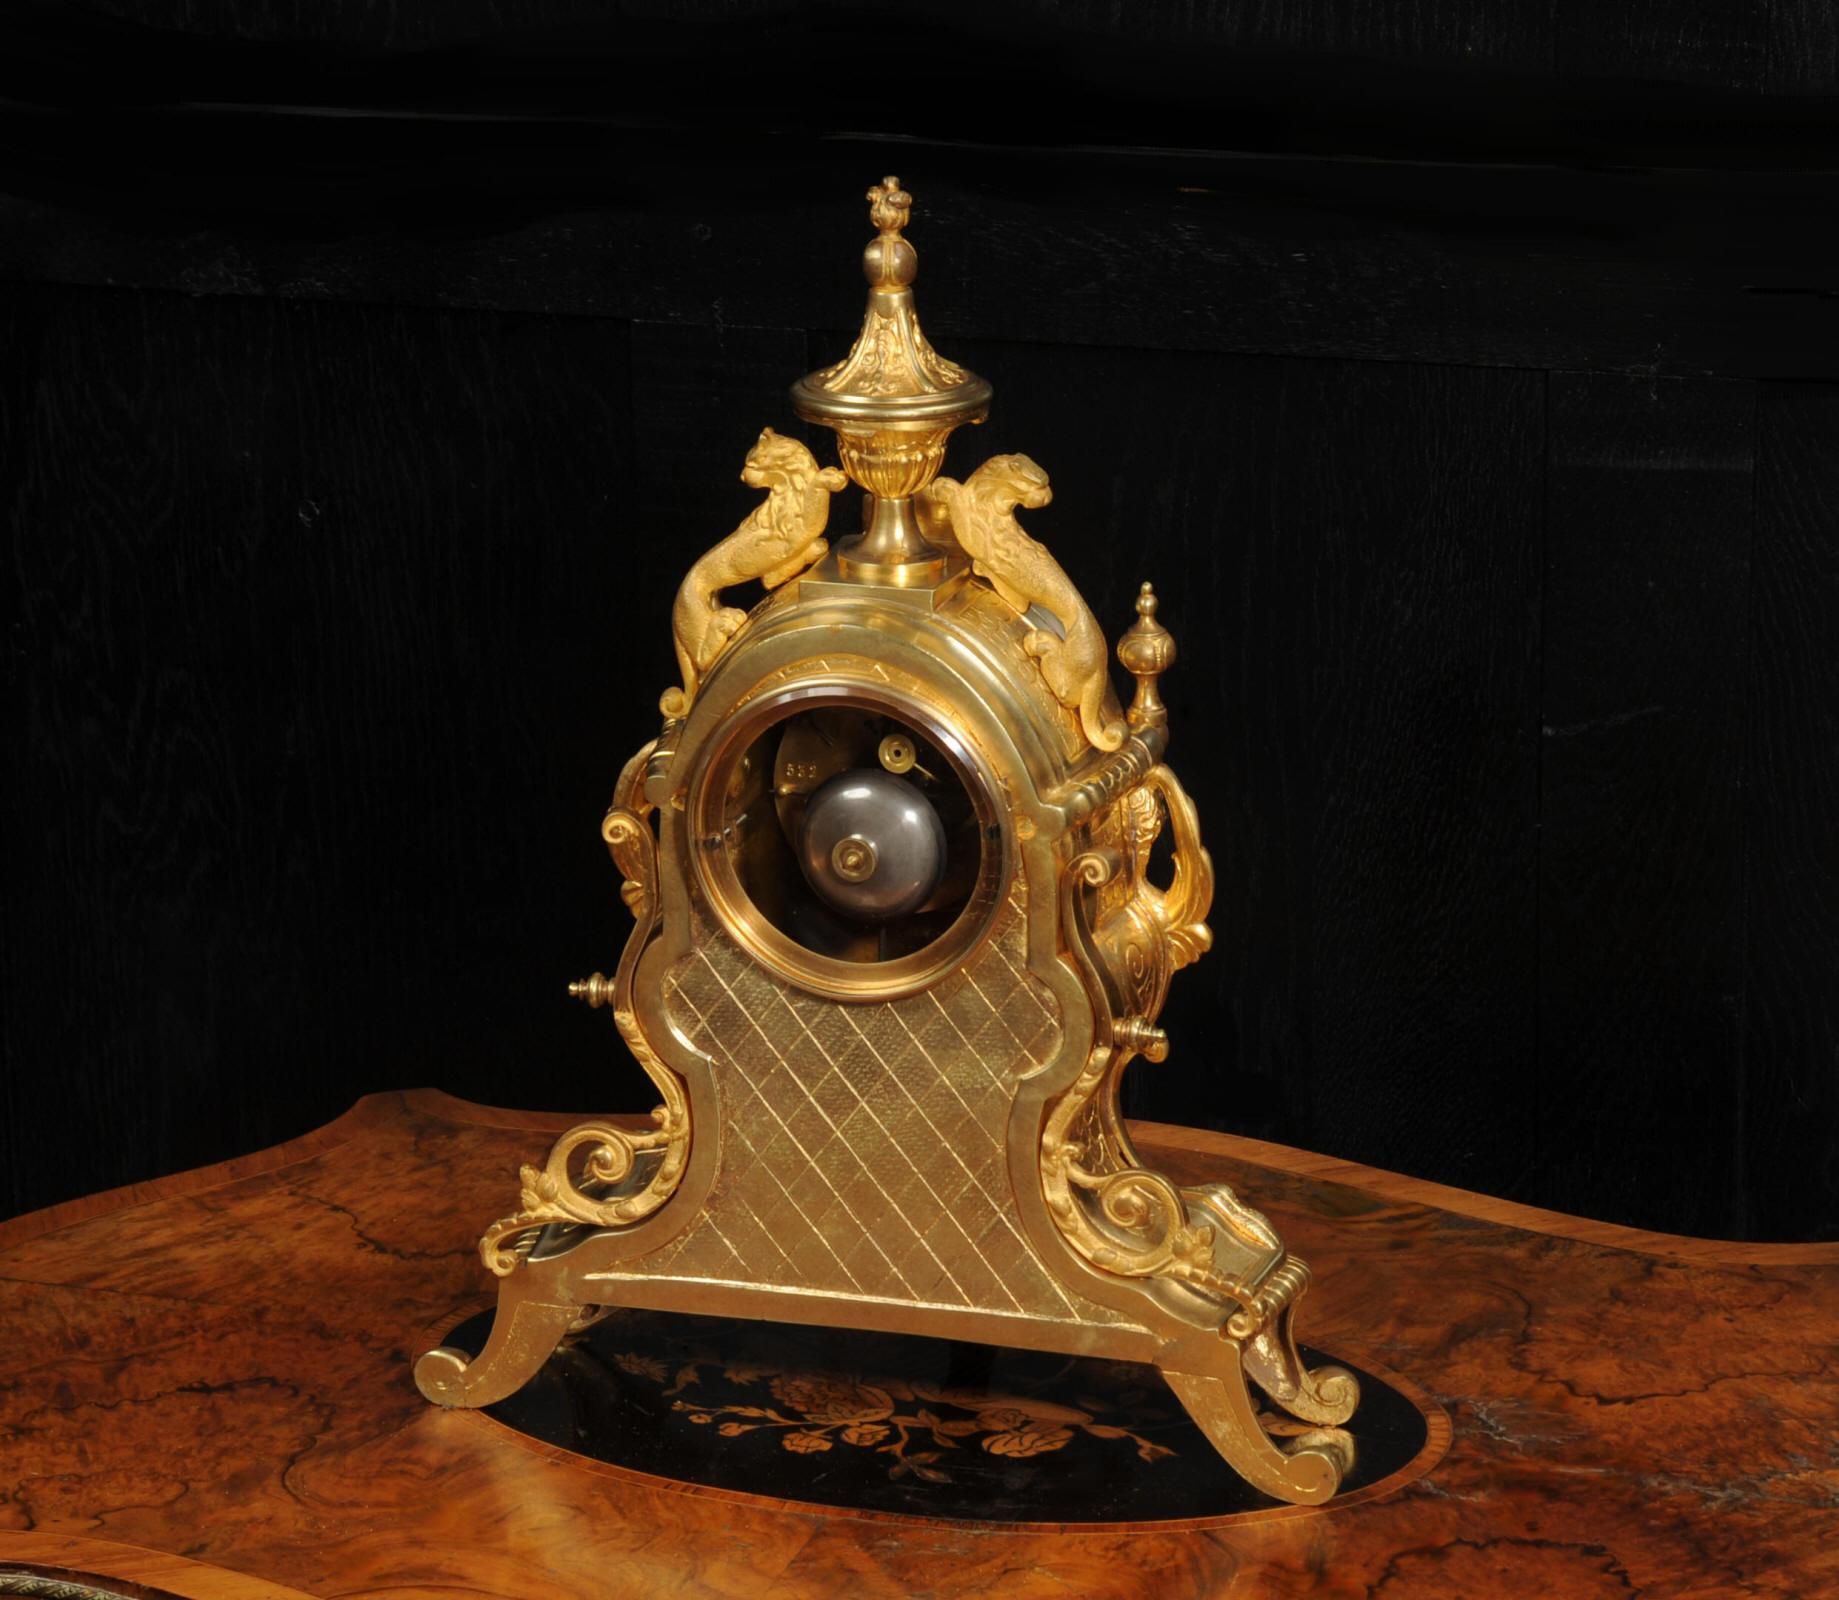 Antique French Ormolu Clock - Lions Rampant - overhauled and tested For Sale 10